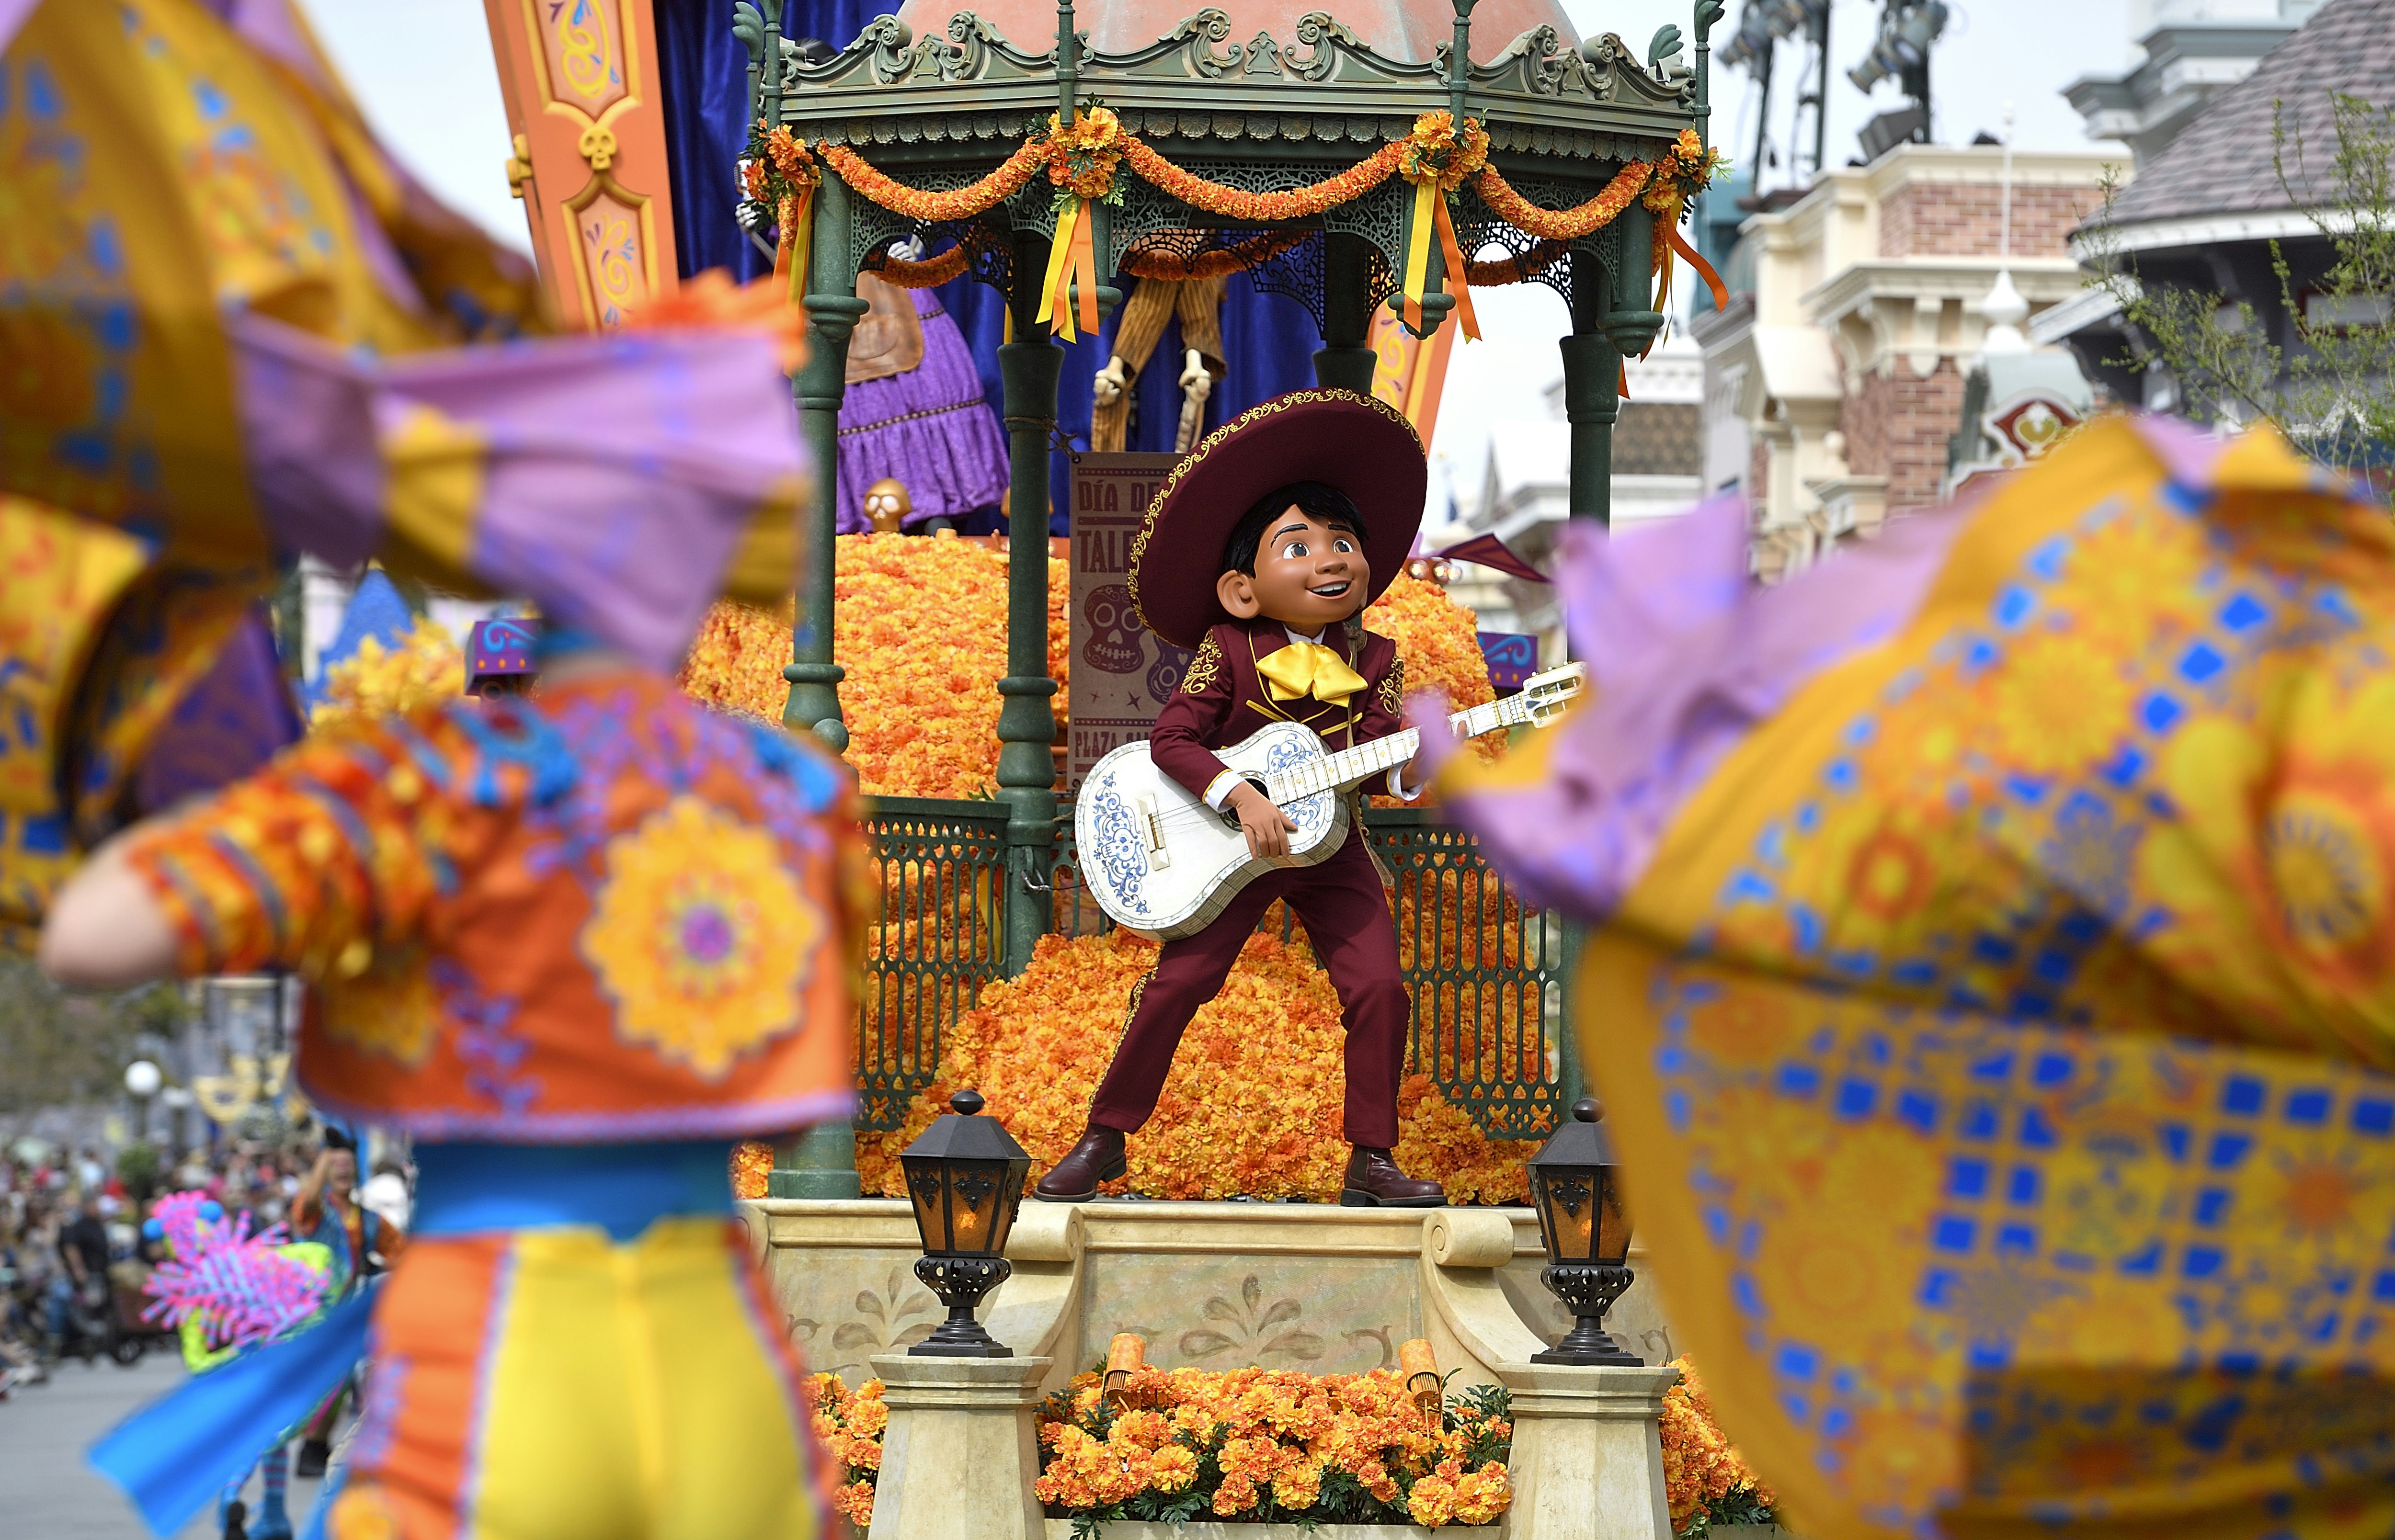 A dressed up character plays the guitar on a colorful parade float